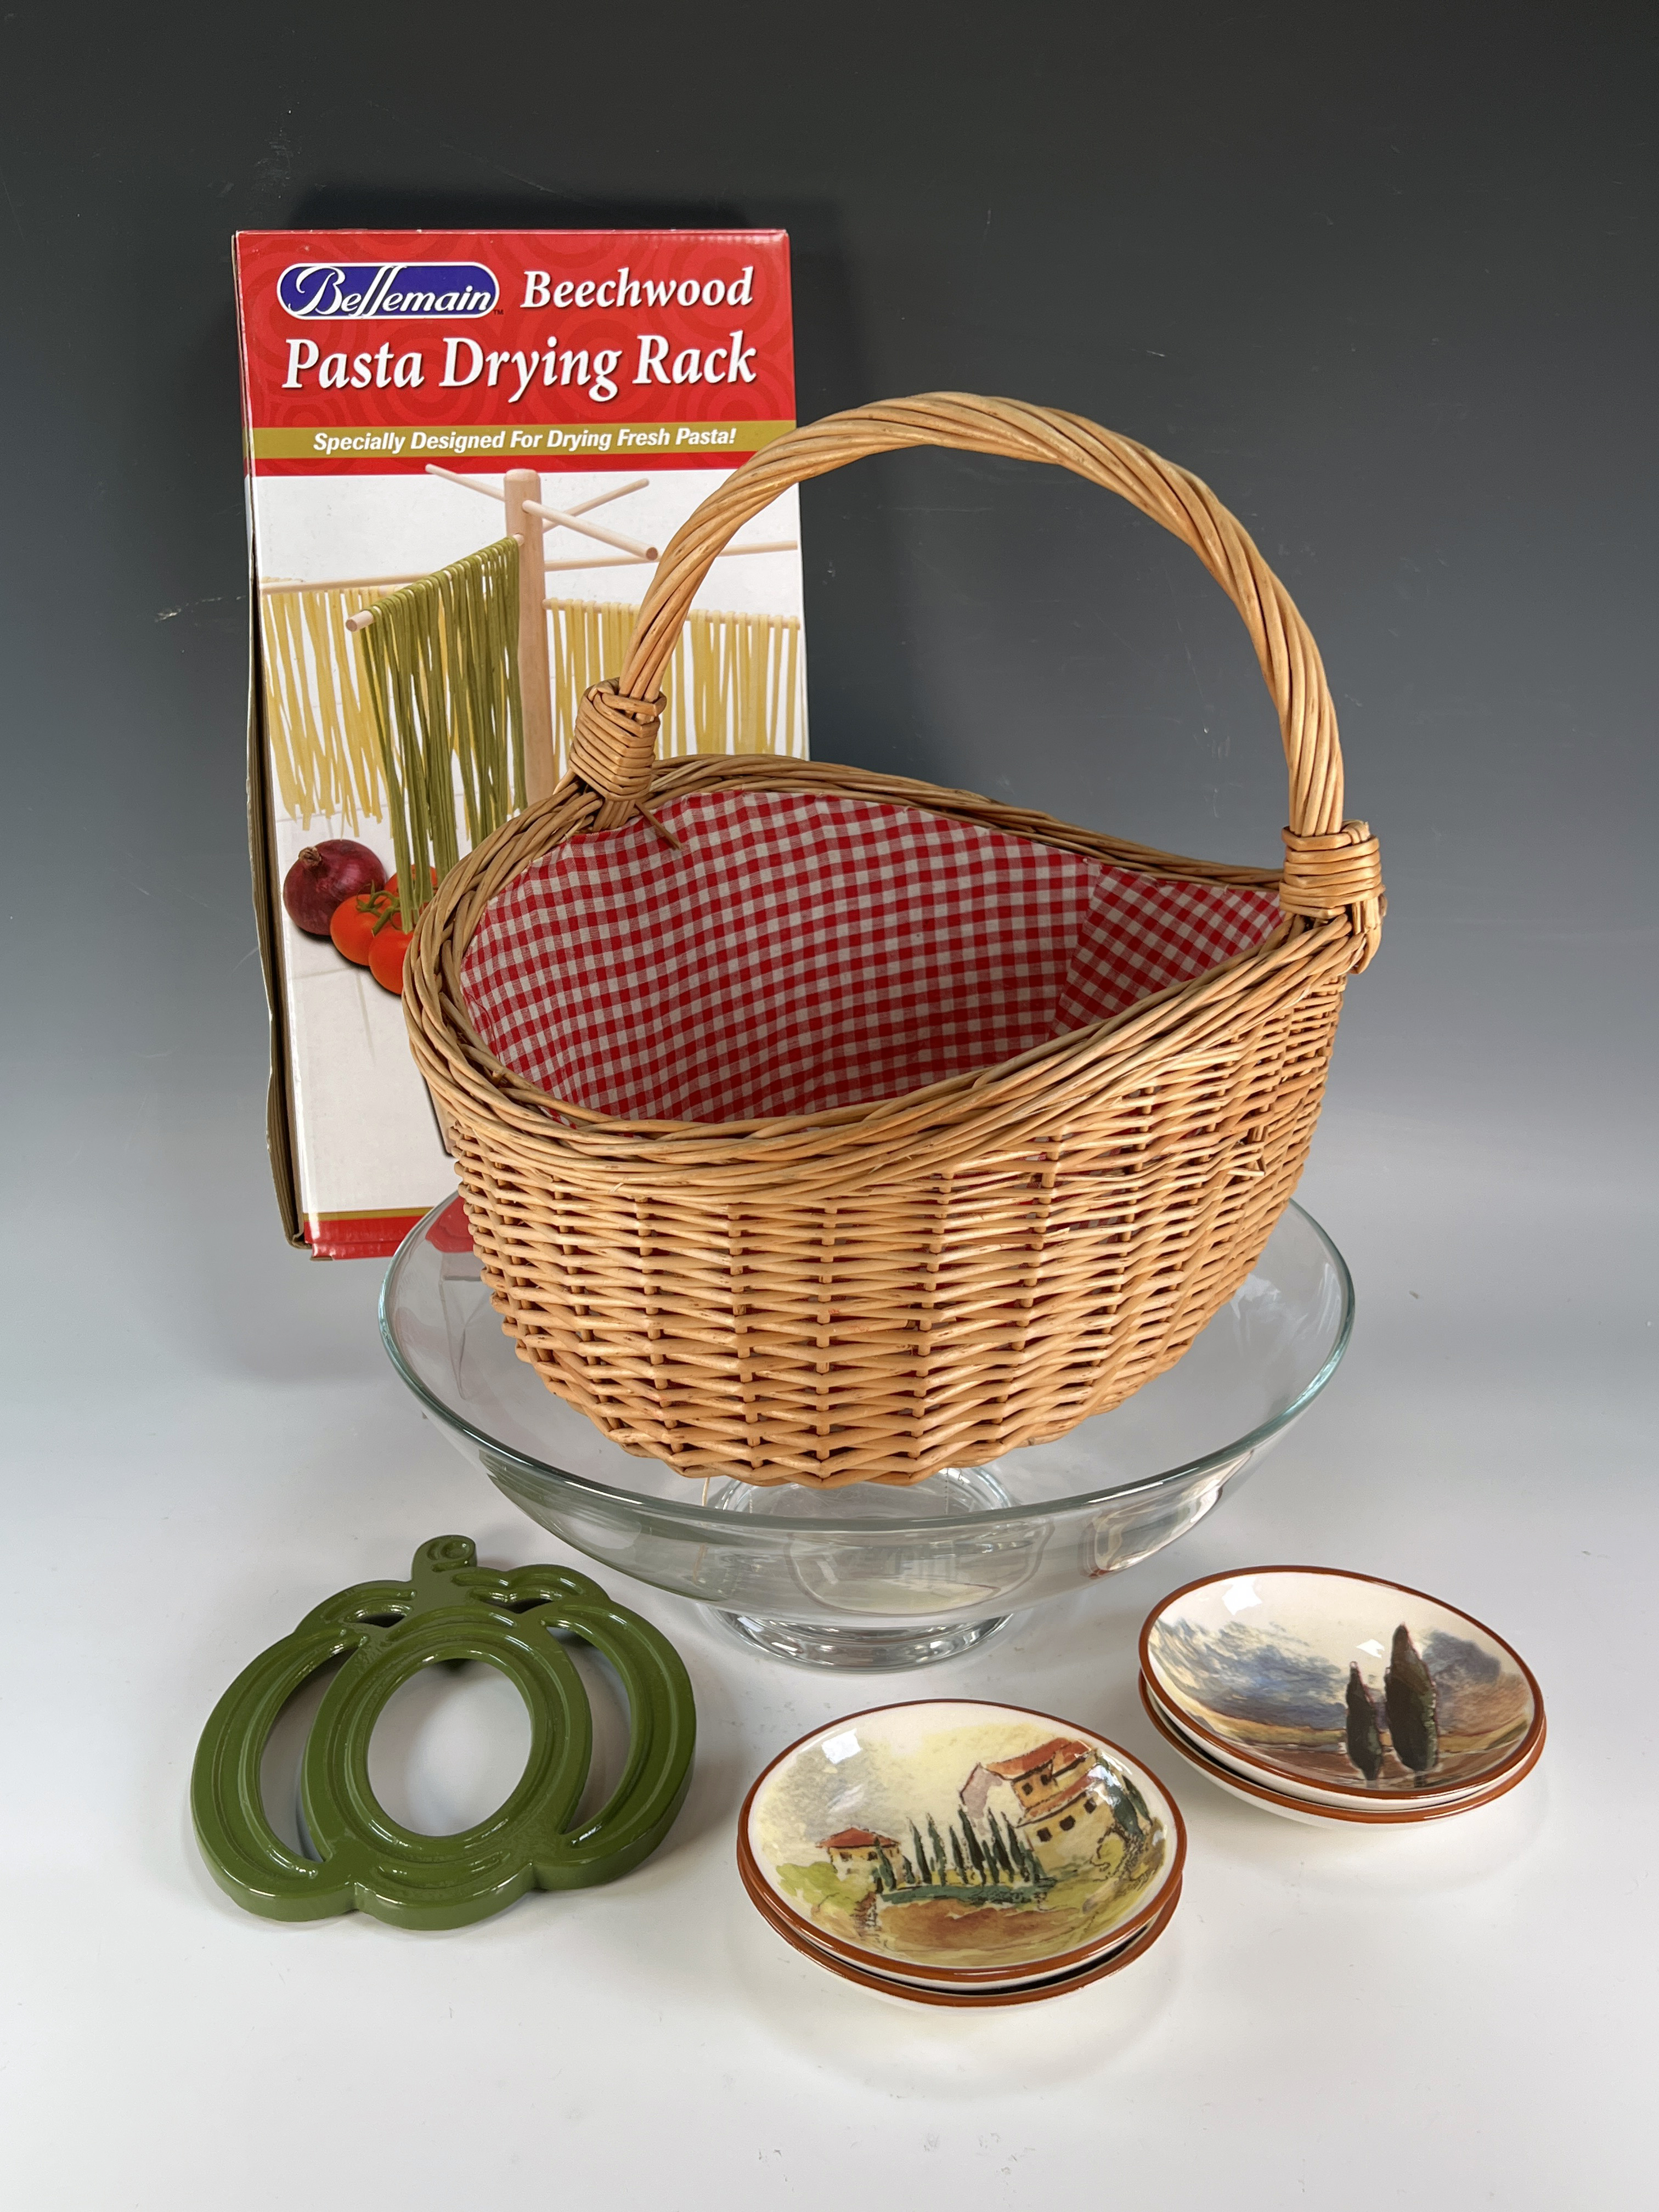 Pasta Drying Rack, Large Glass Serving Bowl, William Sonoma Dishes image 1